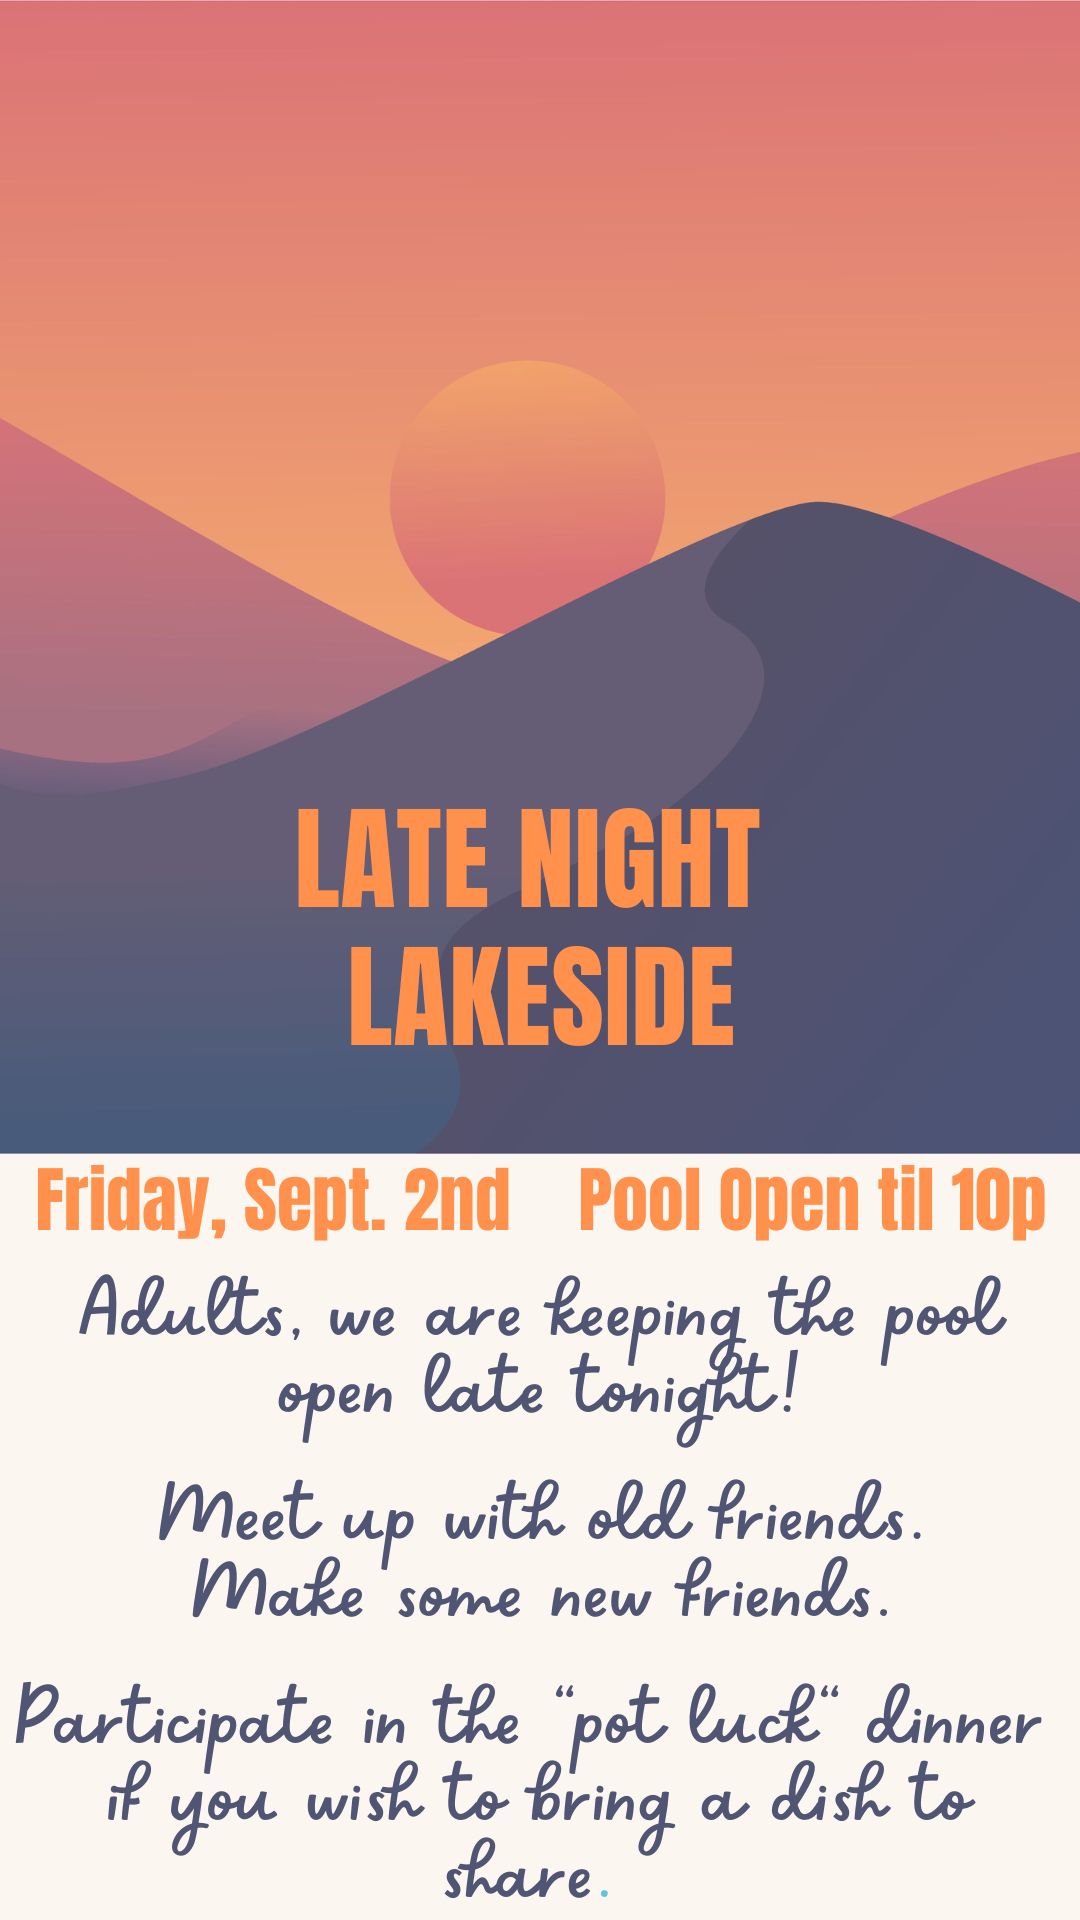 LATE NIGHT LAKESIDE Friday Sept 2nd